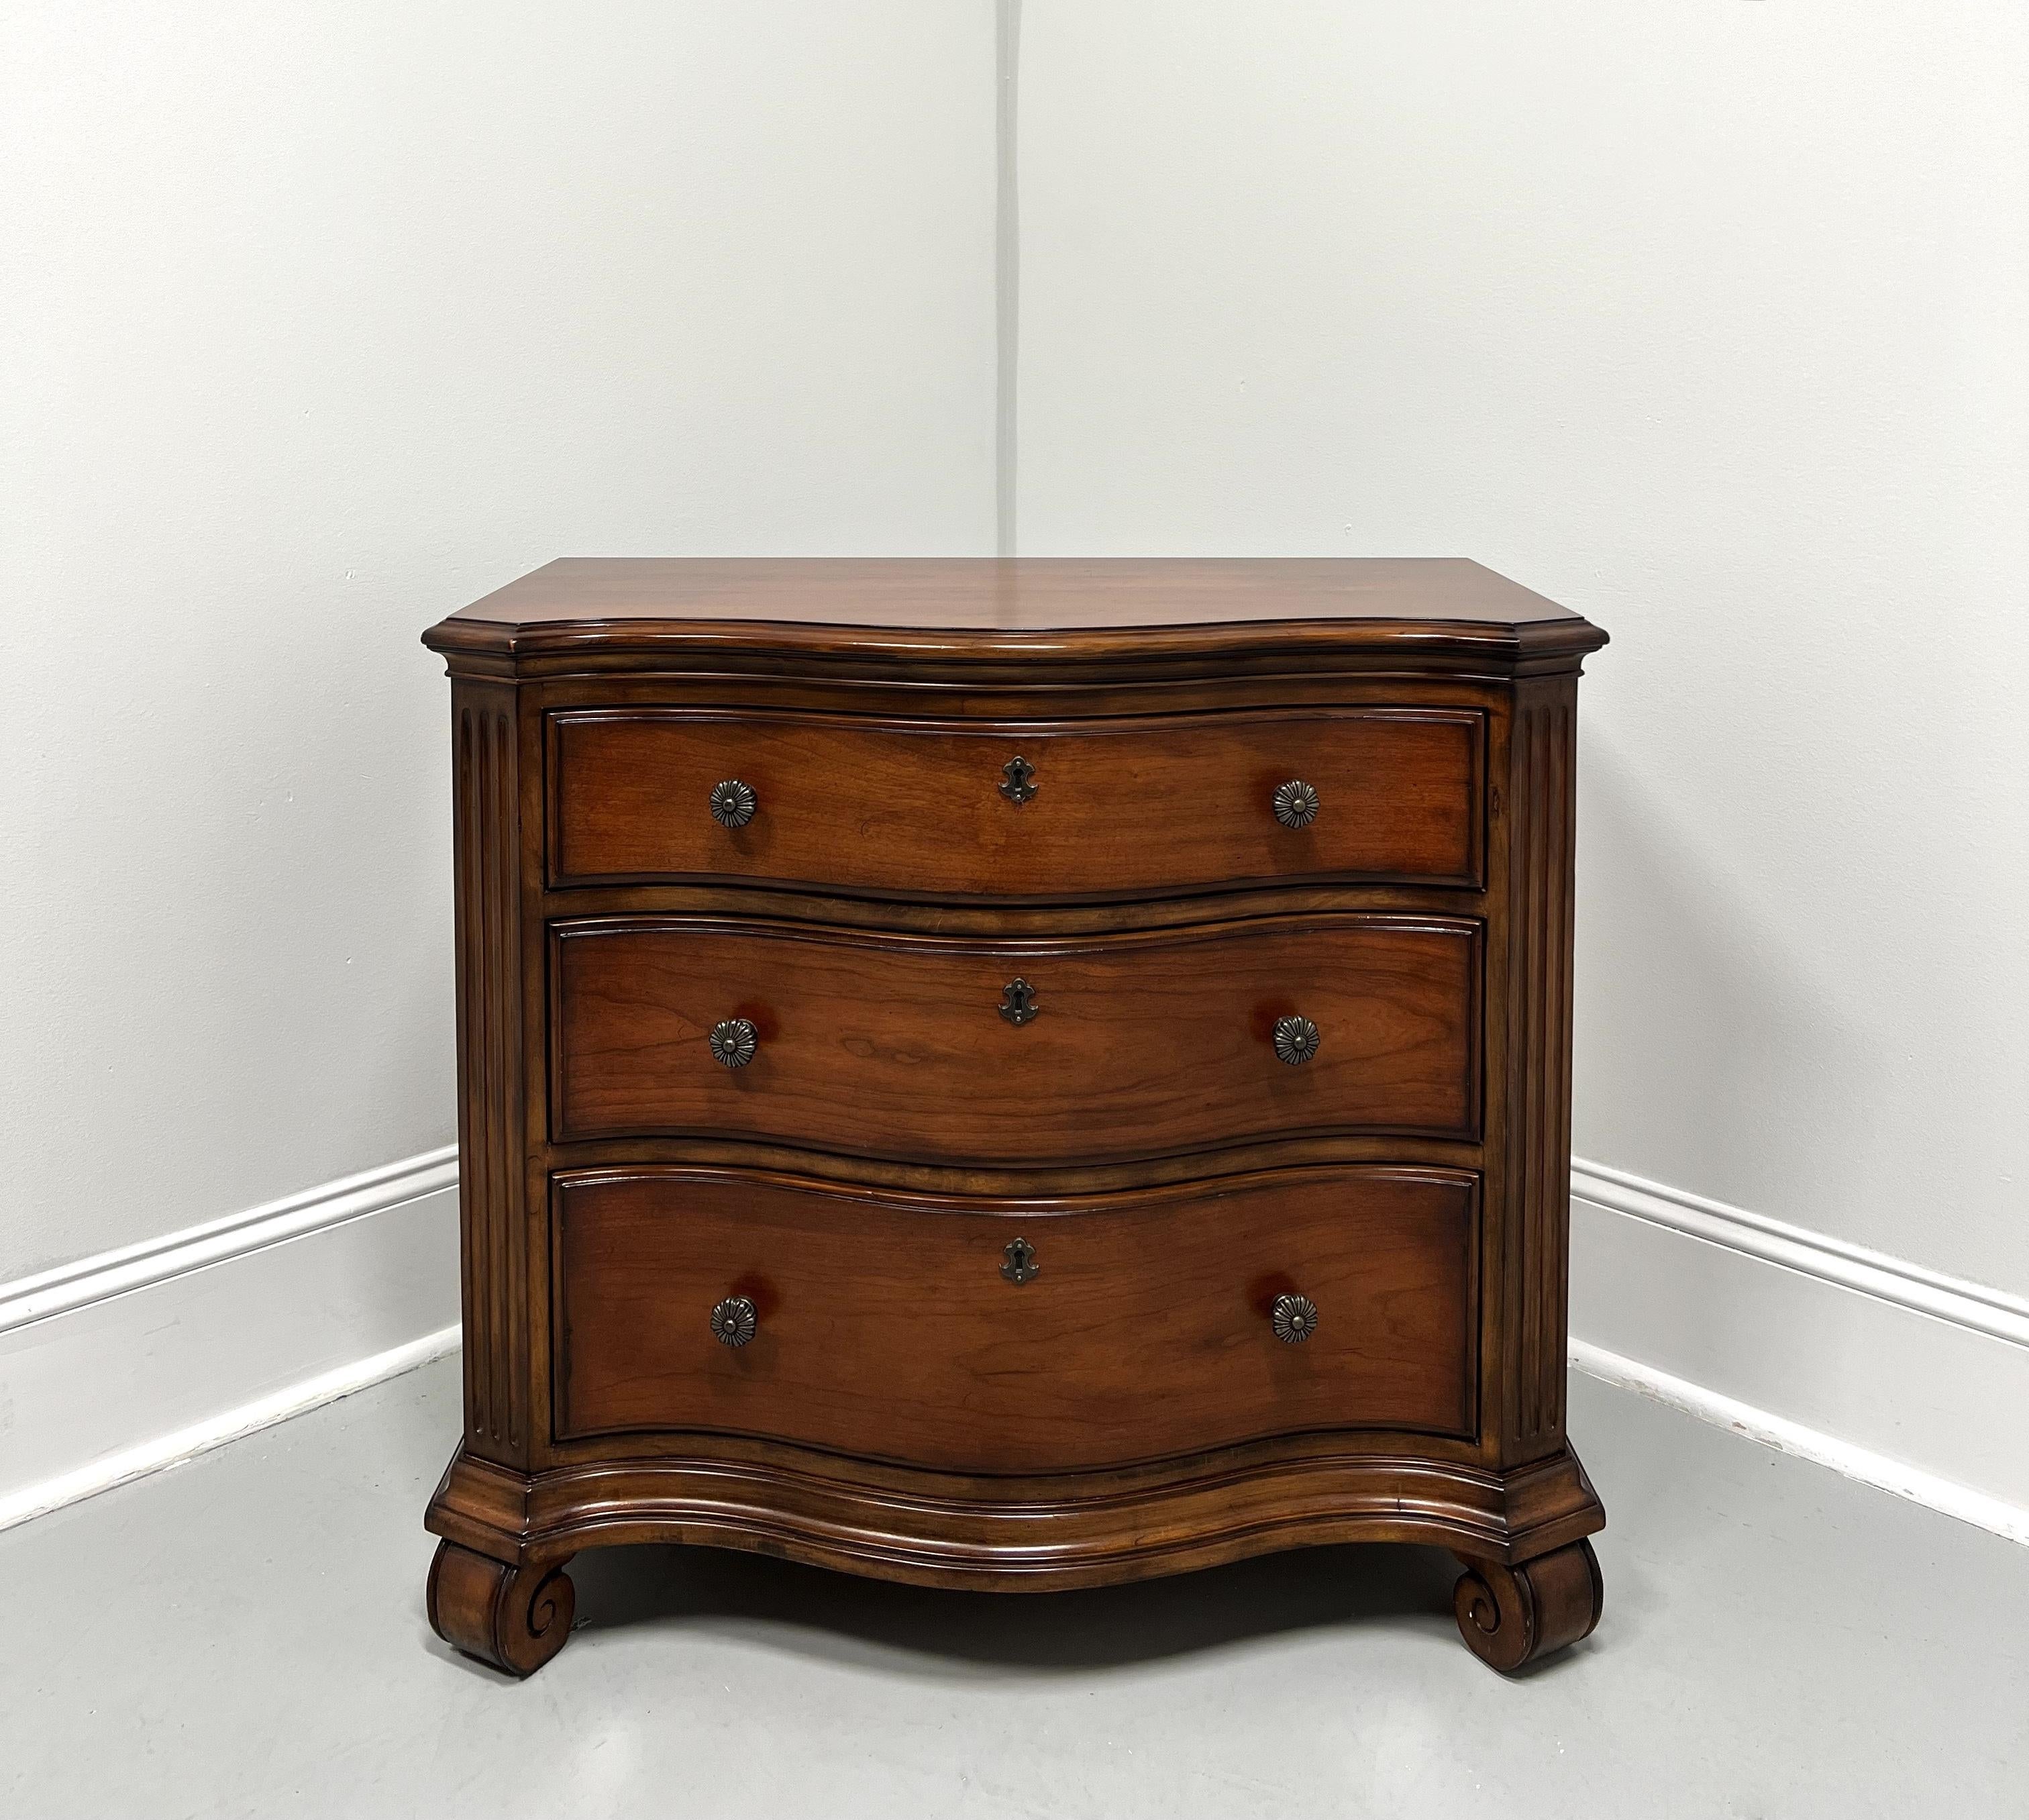 An Italian Tuscan style nightstand, unbranded. Cherry wood with decorative brass knob hardware, serpentine shape, ogee edge to the top with clipped front corners, fluted columns to front sides, faux keyhole escutcheons, and scroll feet. Features